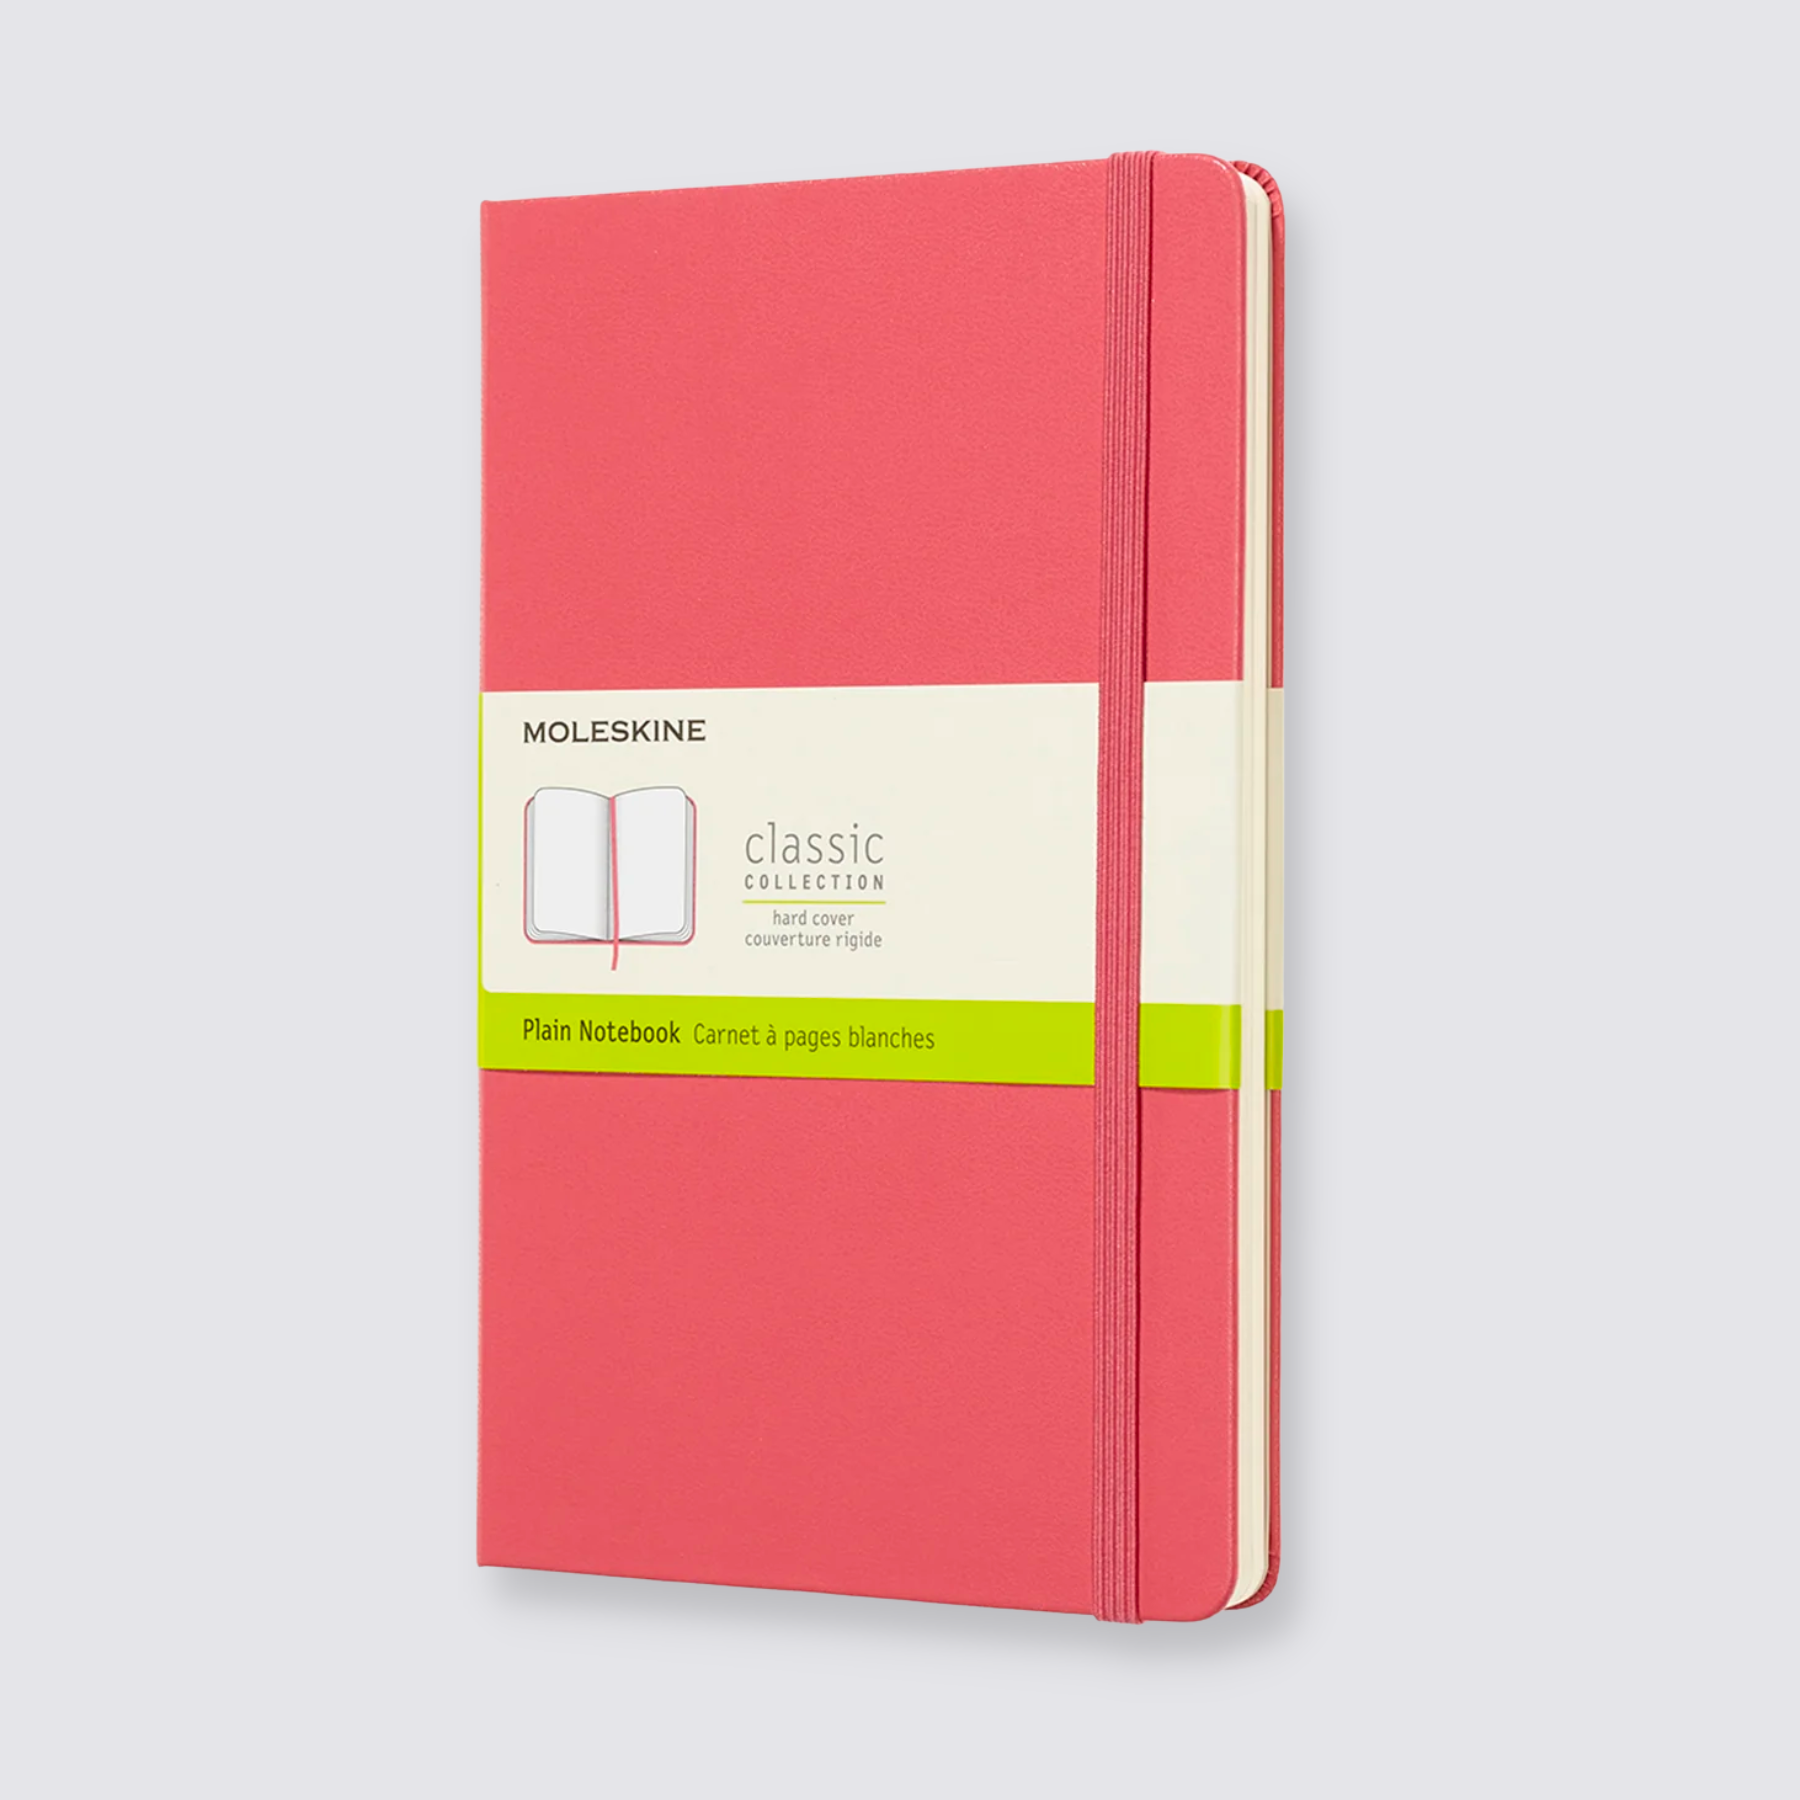 Moleskine Chapters Journal, Slim Medium, Dotted, Mist Green, Soft Cover  (3.75 x 7) (Diary)